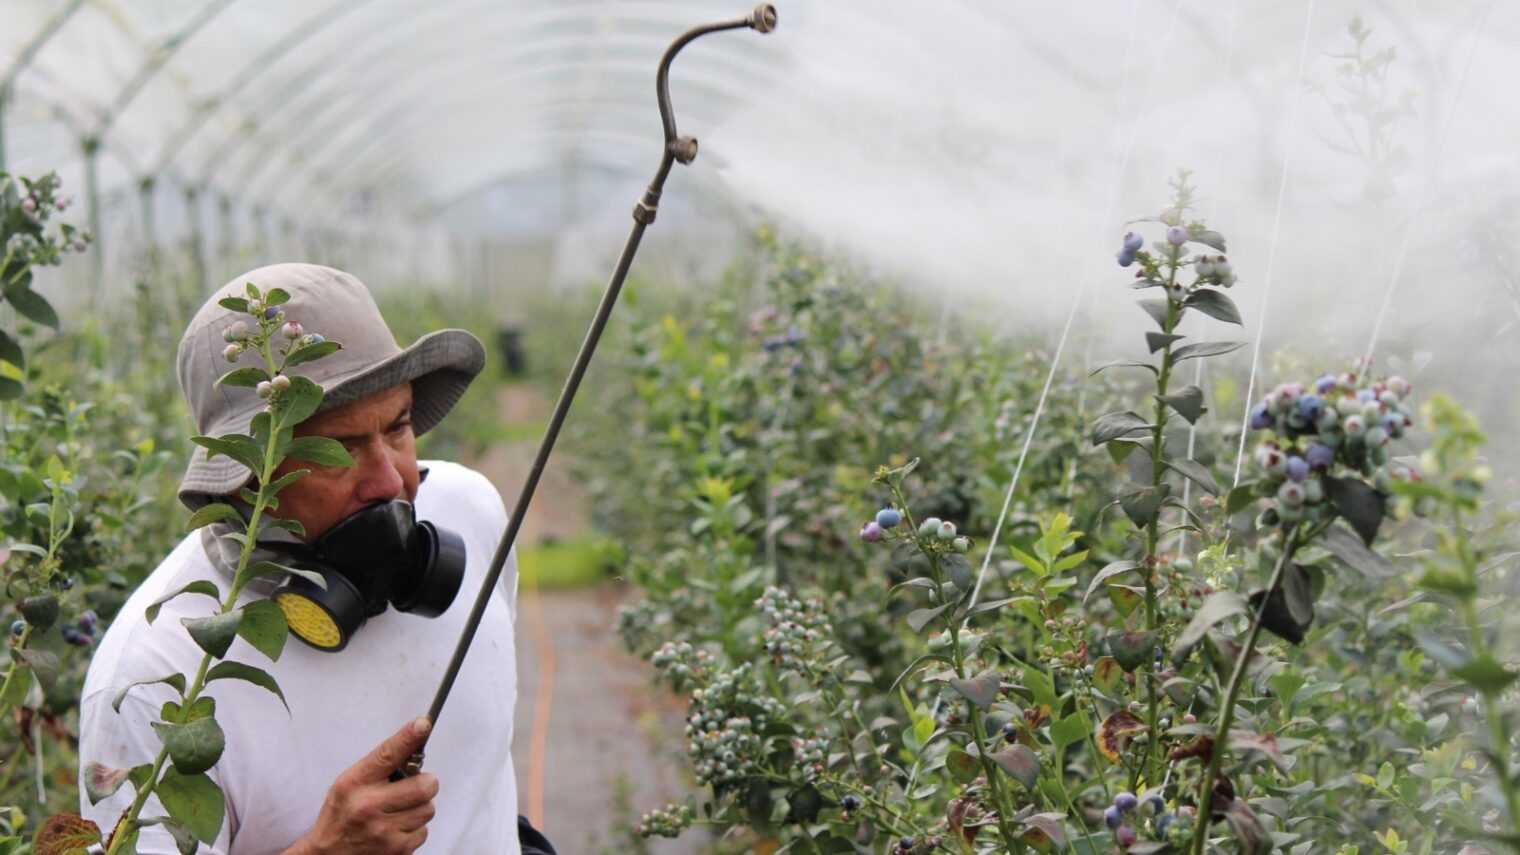 Why Are Pesticides Good For The Environment